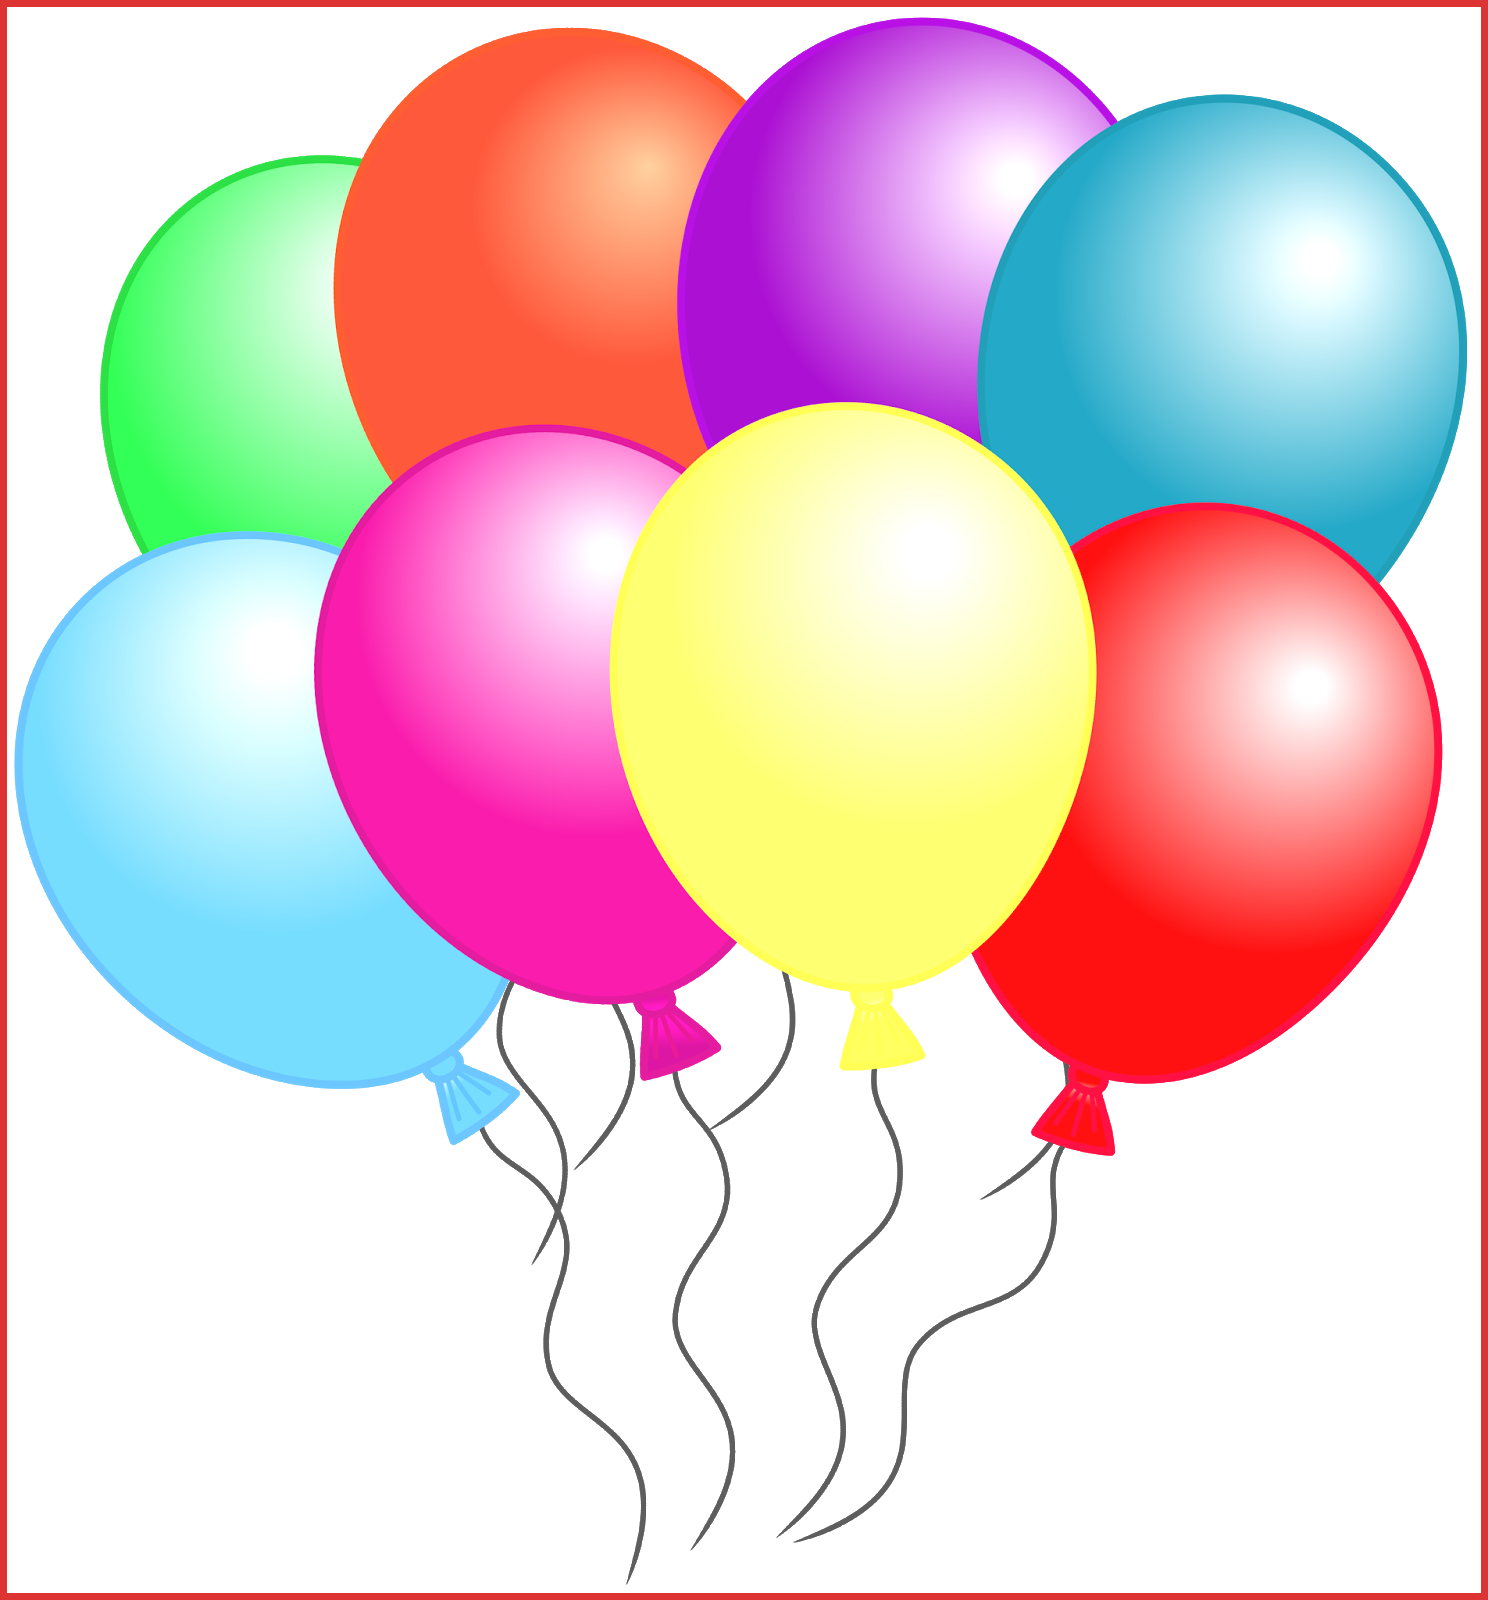 Balloon Clipart That Can Be Ed Individually And Used - Clip Art (1488x1600)